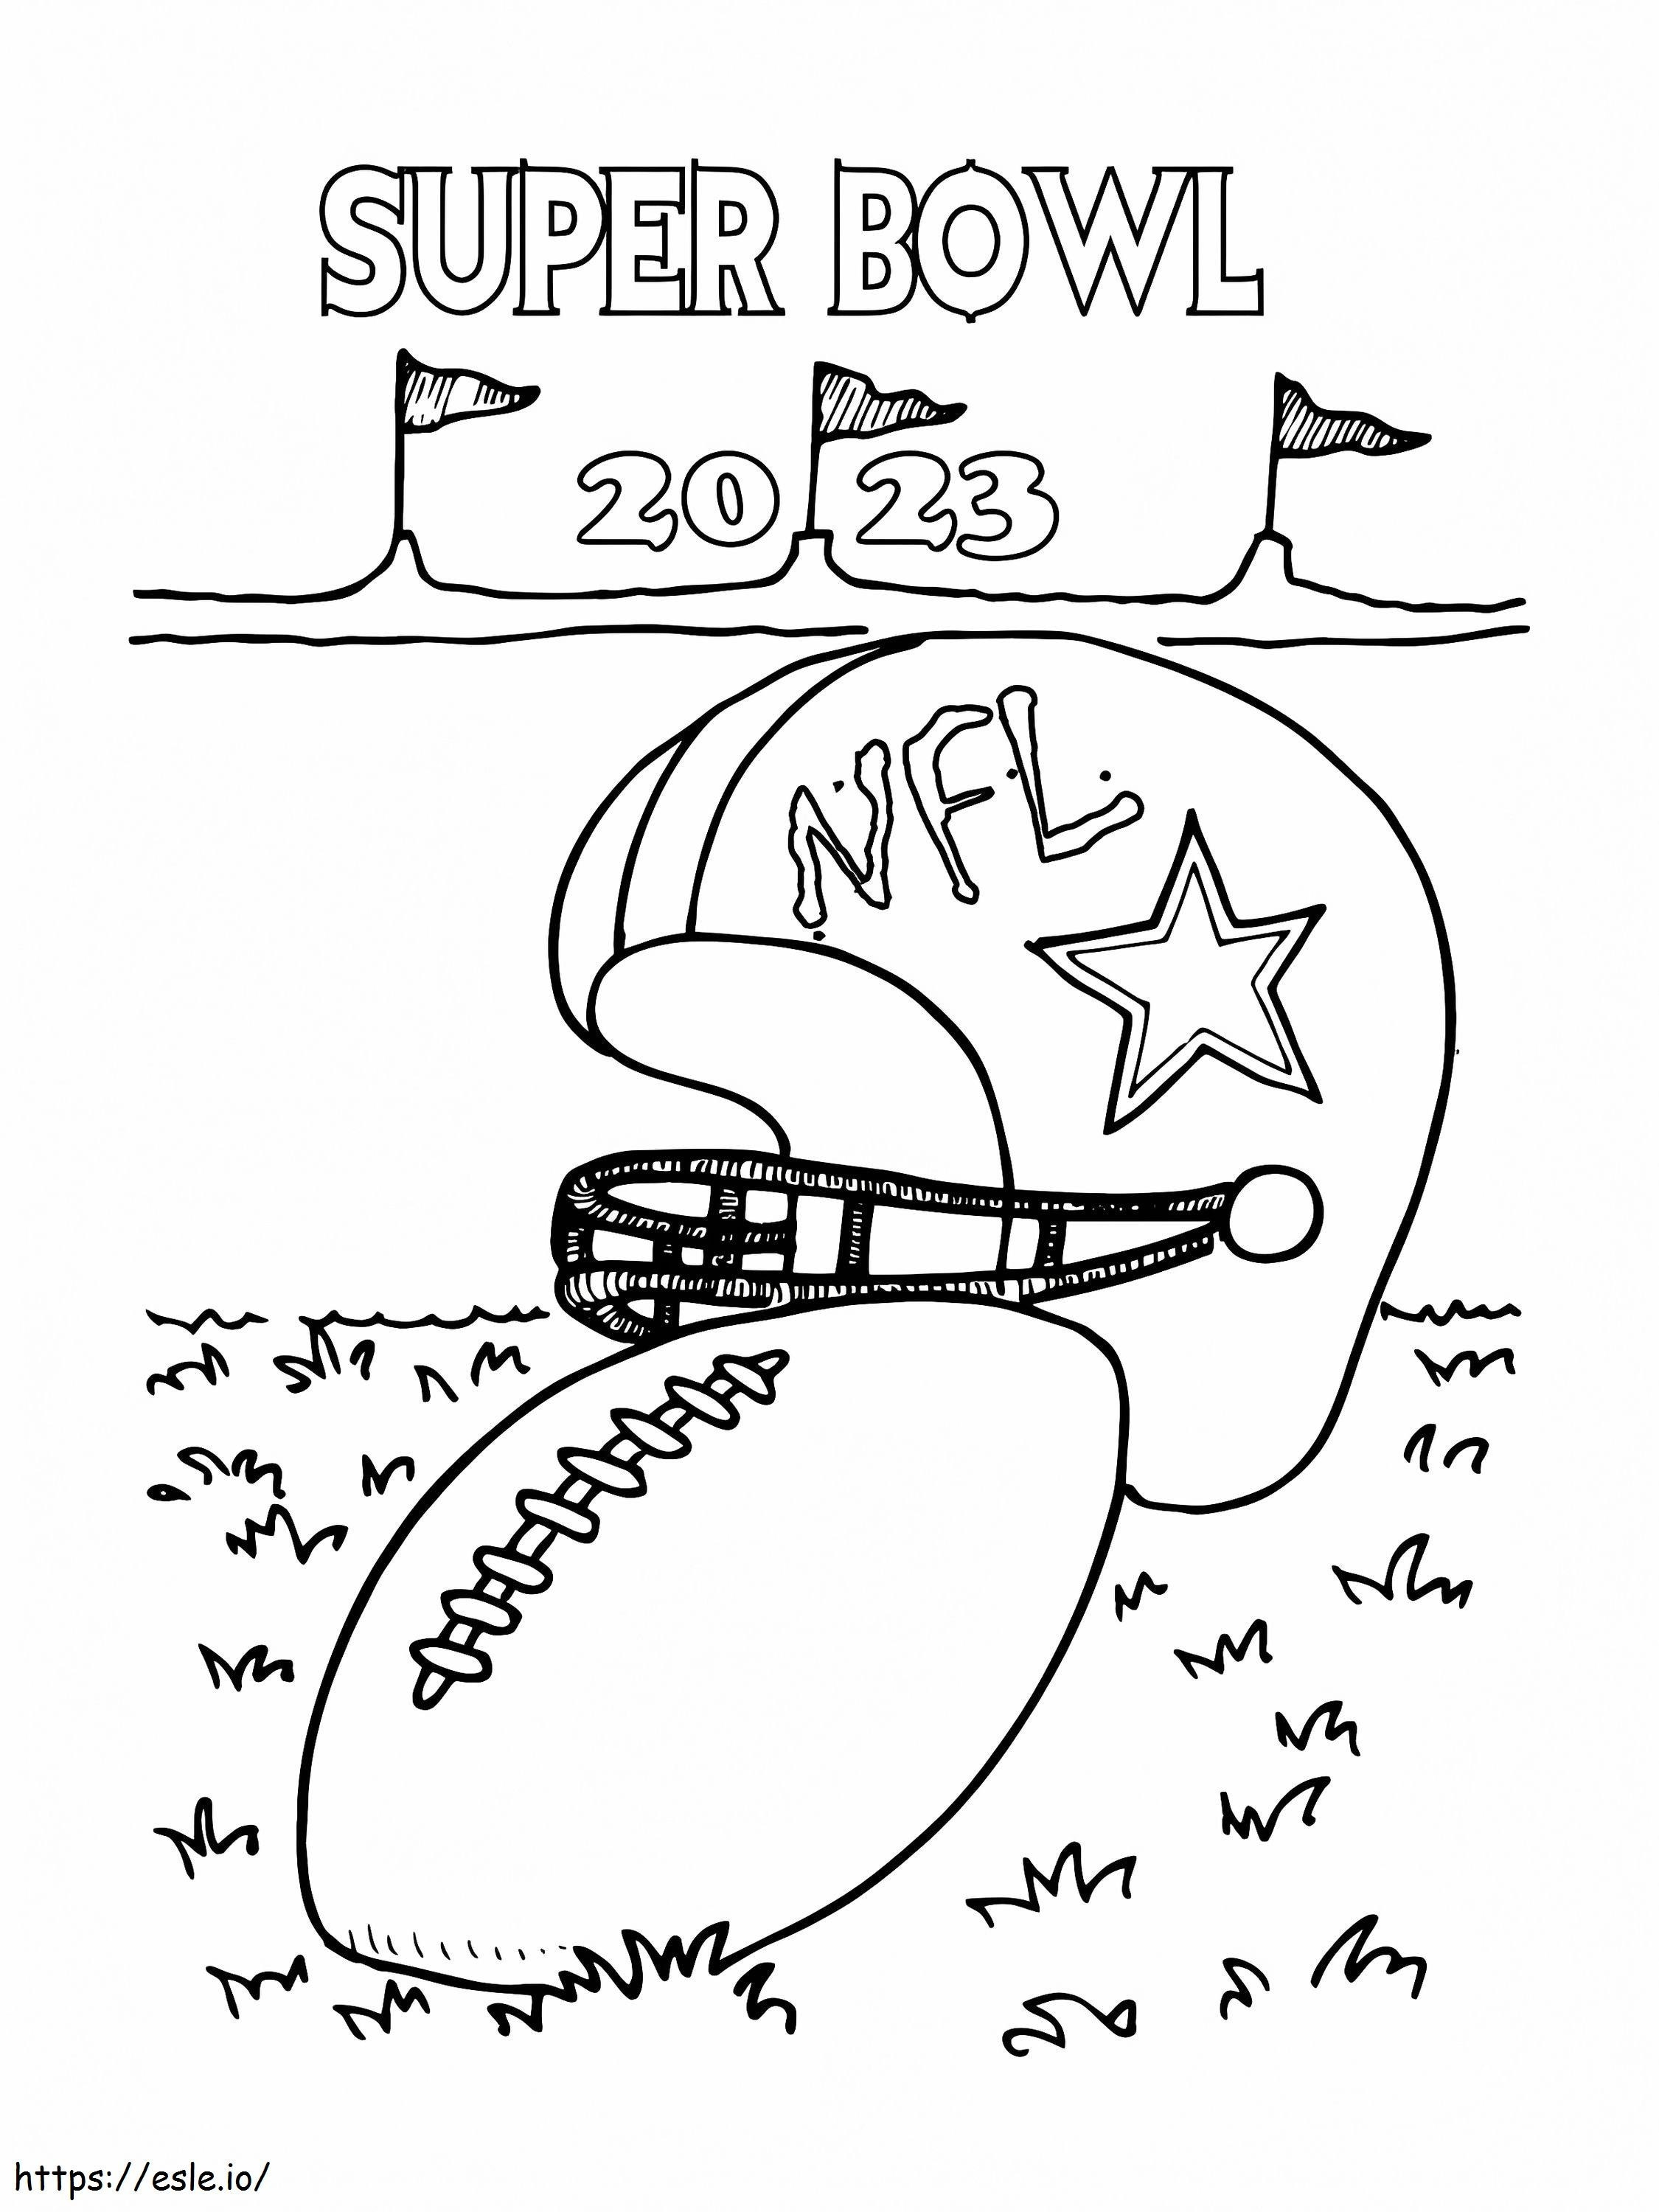 Super Bowl Helmet And Ball coloring page